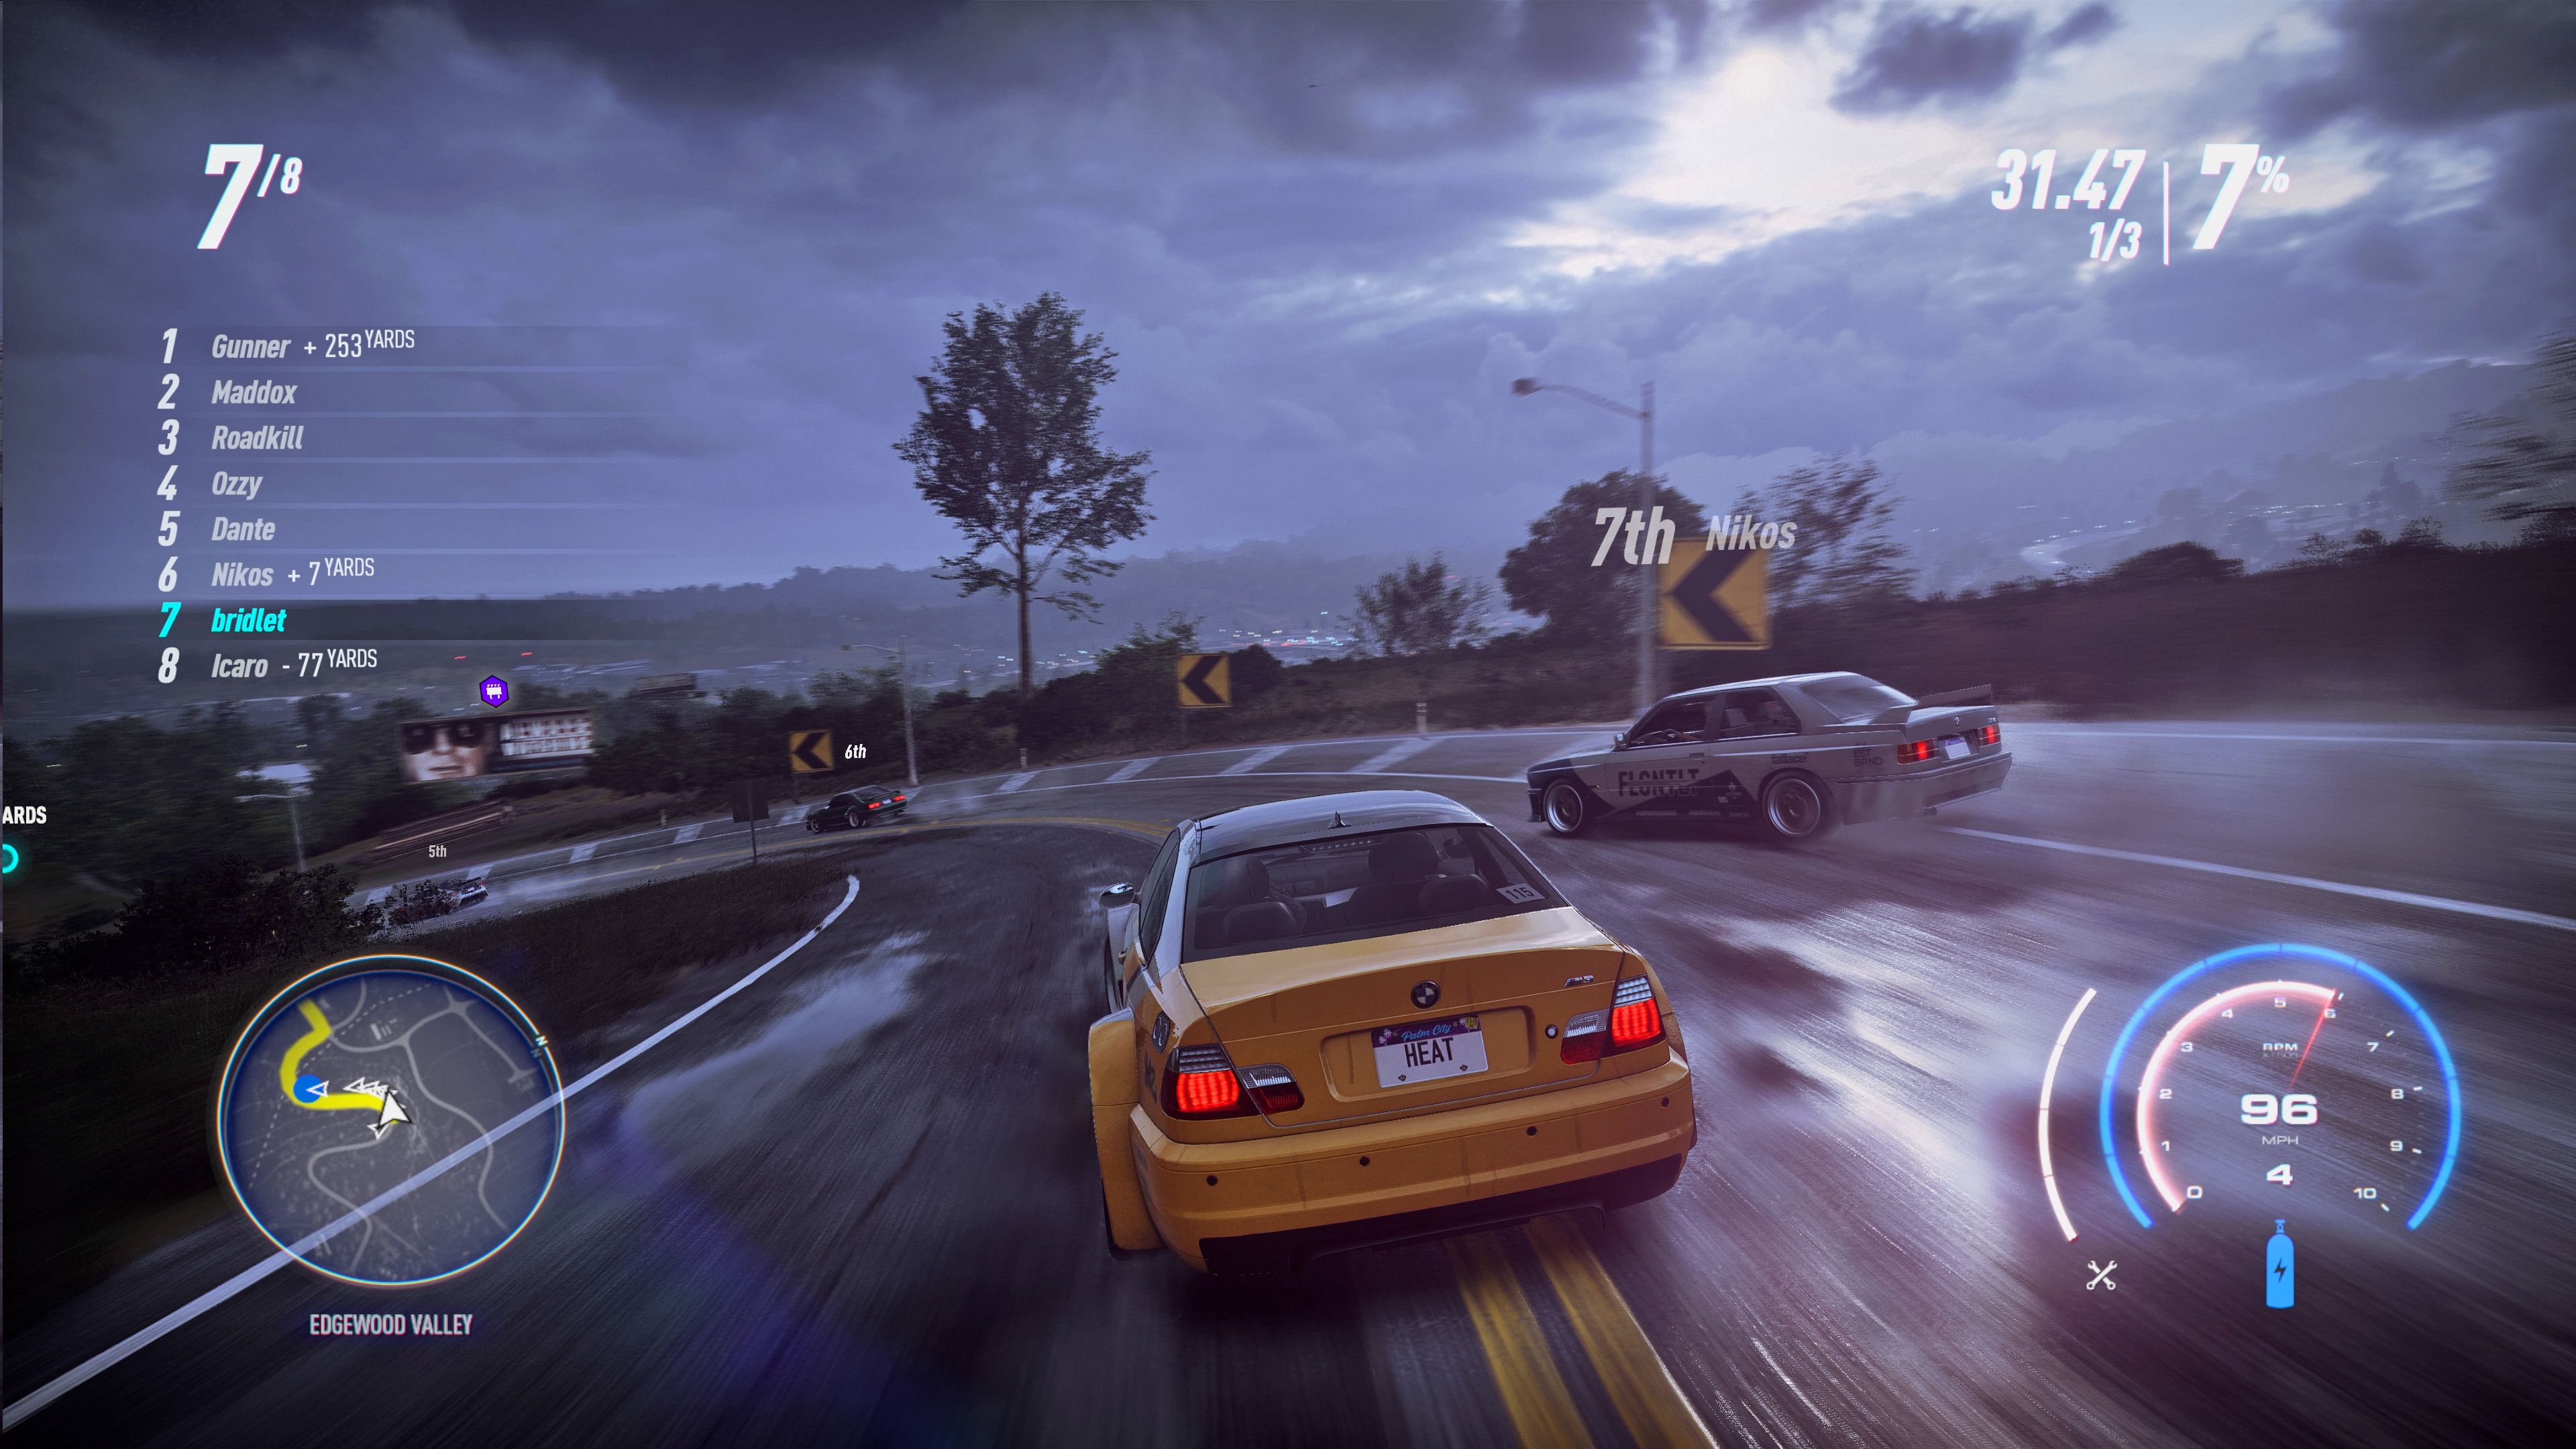 How 'Need For Speed' Became the World's Biggest Racing Game